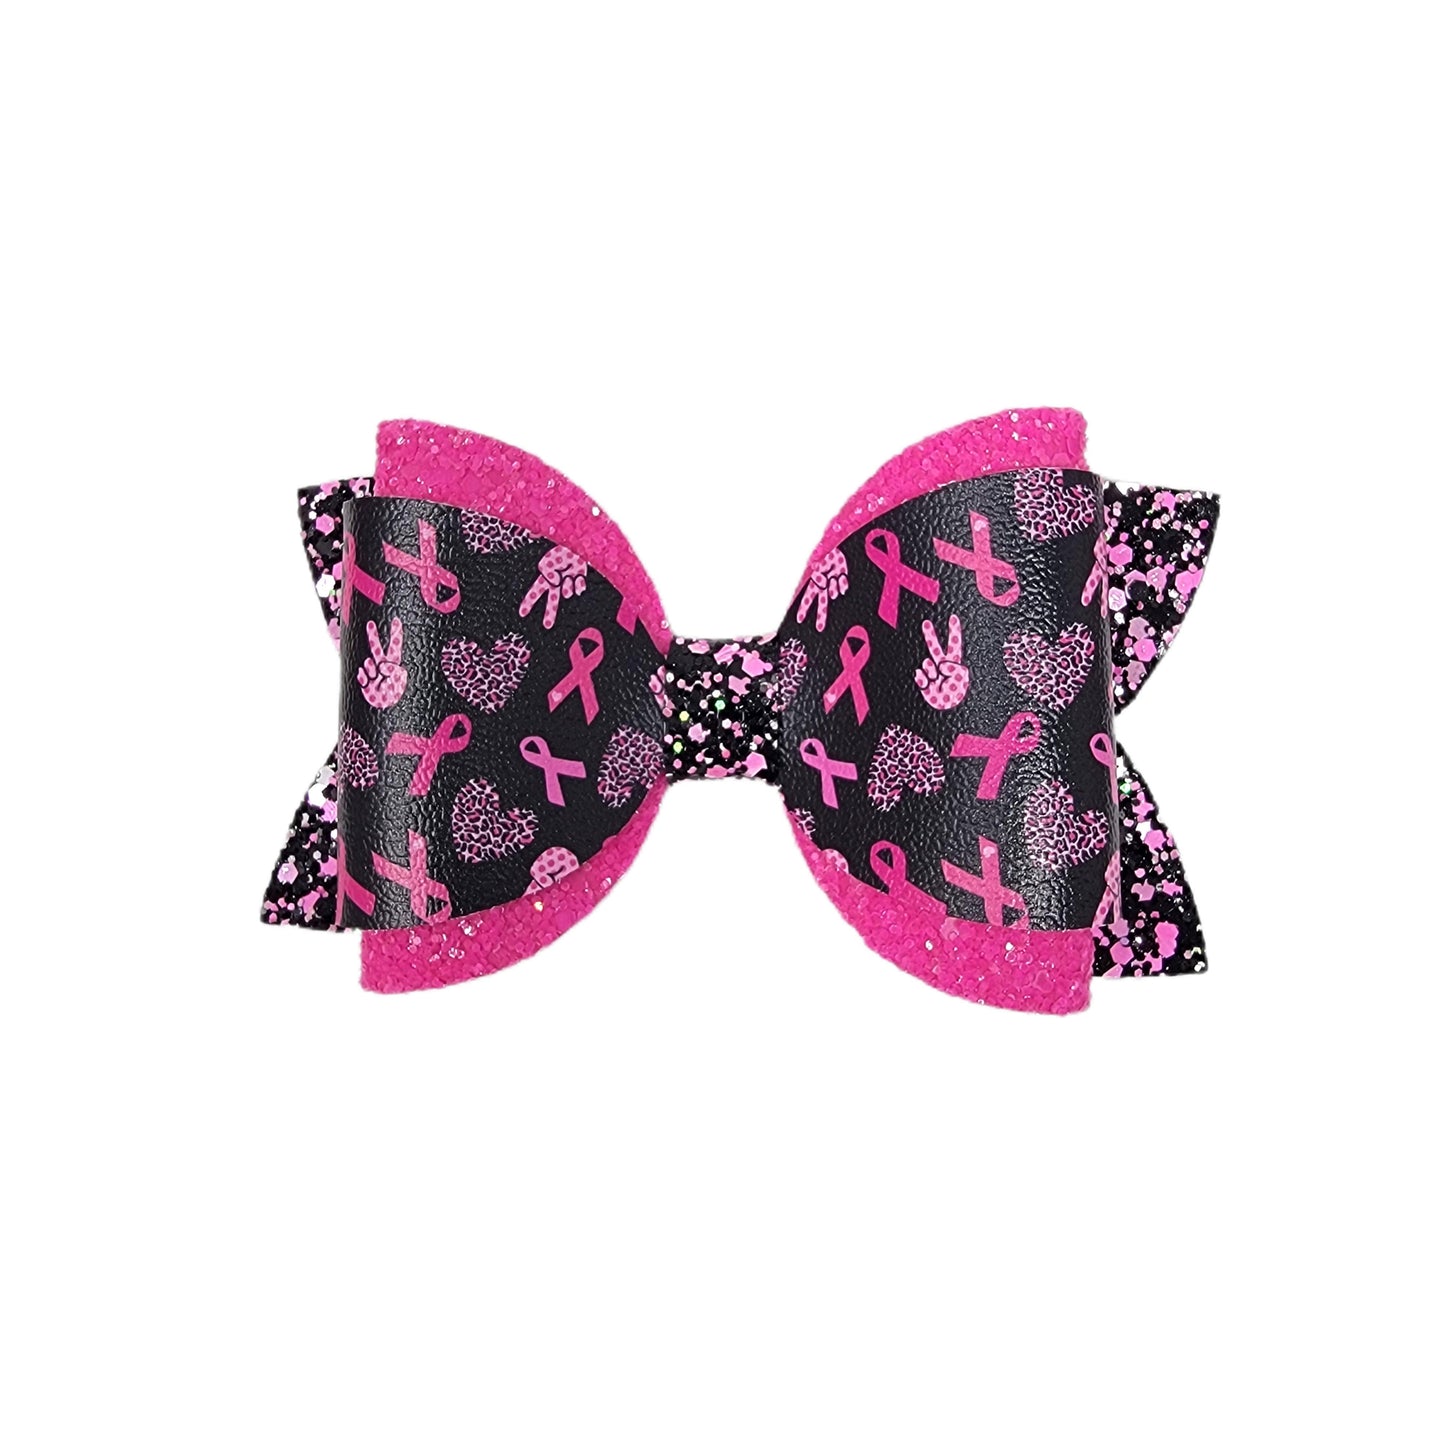 Peace Love Ribbons on Black Dressed-up Diva Bow 5" - Waterfall Wishes